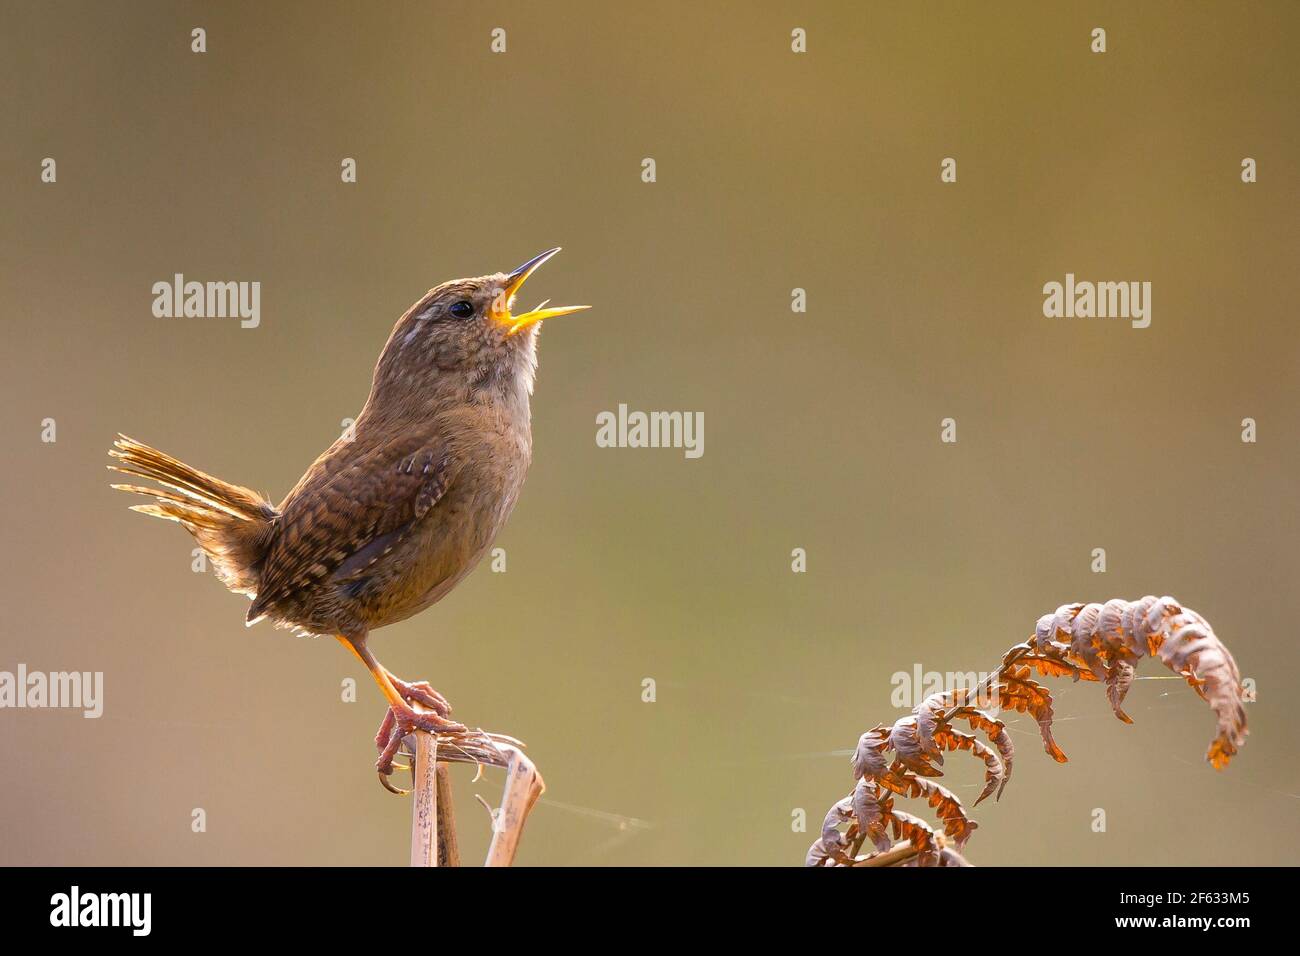 Kidderminster, UK. 29th March, 2021. UK weather: as the day draws to a close this little Jenny Wren starts singing backlit by the evening springtime sunshine. Credit: Lee Hudson/Alamy Live News Stock Photo